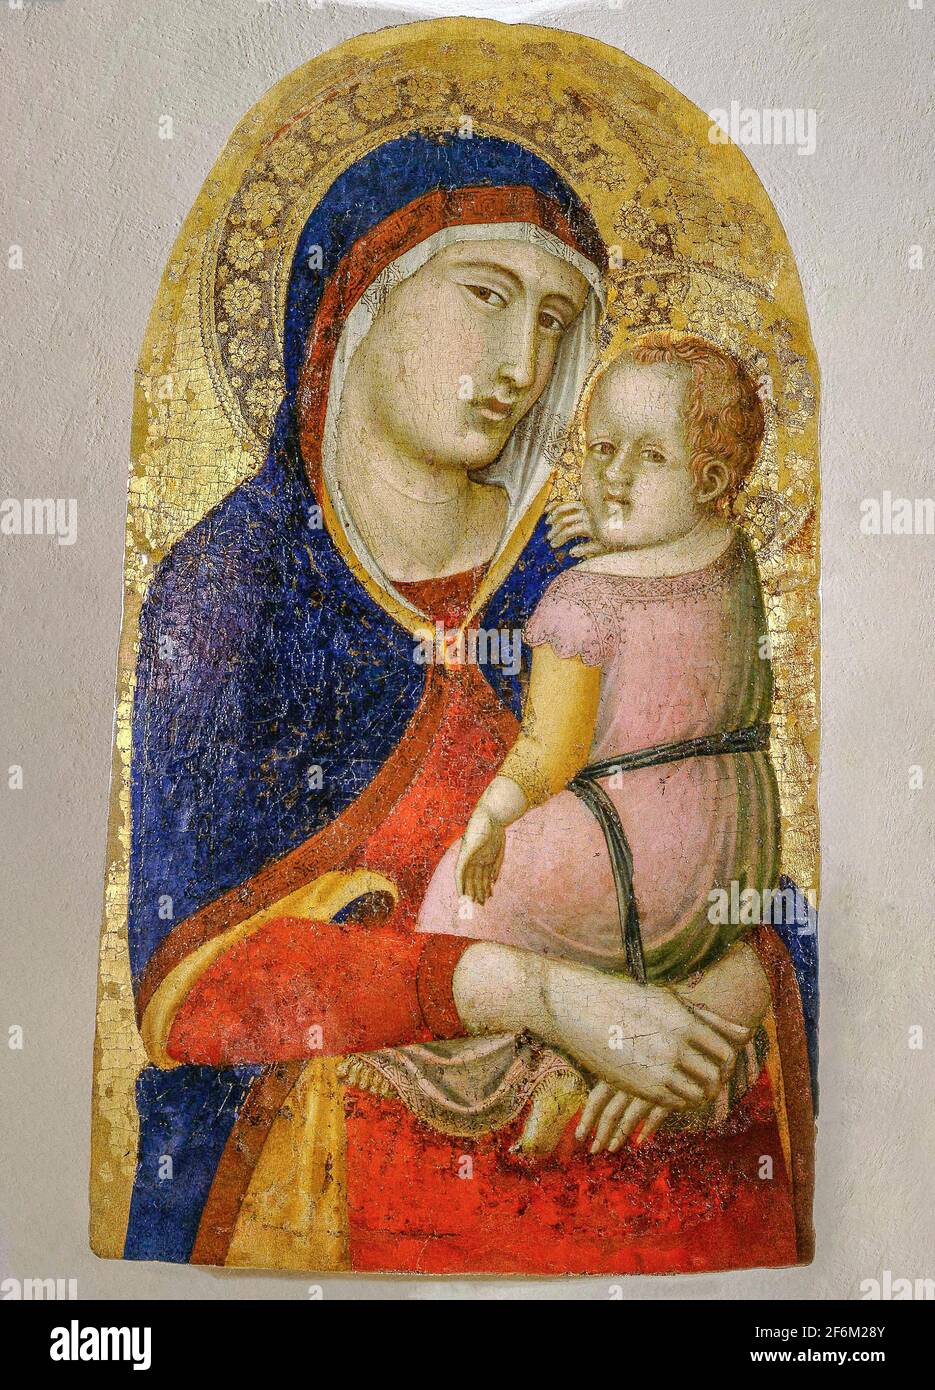 Italy ,Tuscany Buonconvento Museum of Sacred Art of the Val d' Arbia 'Madonna with Child' by Pietro Lorenzetti before 1348 Stock Photo